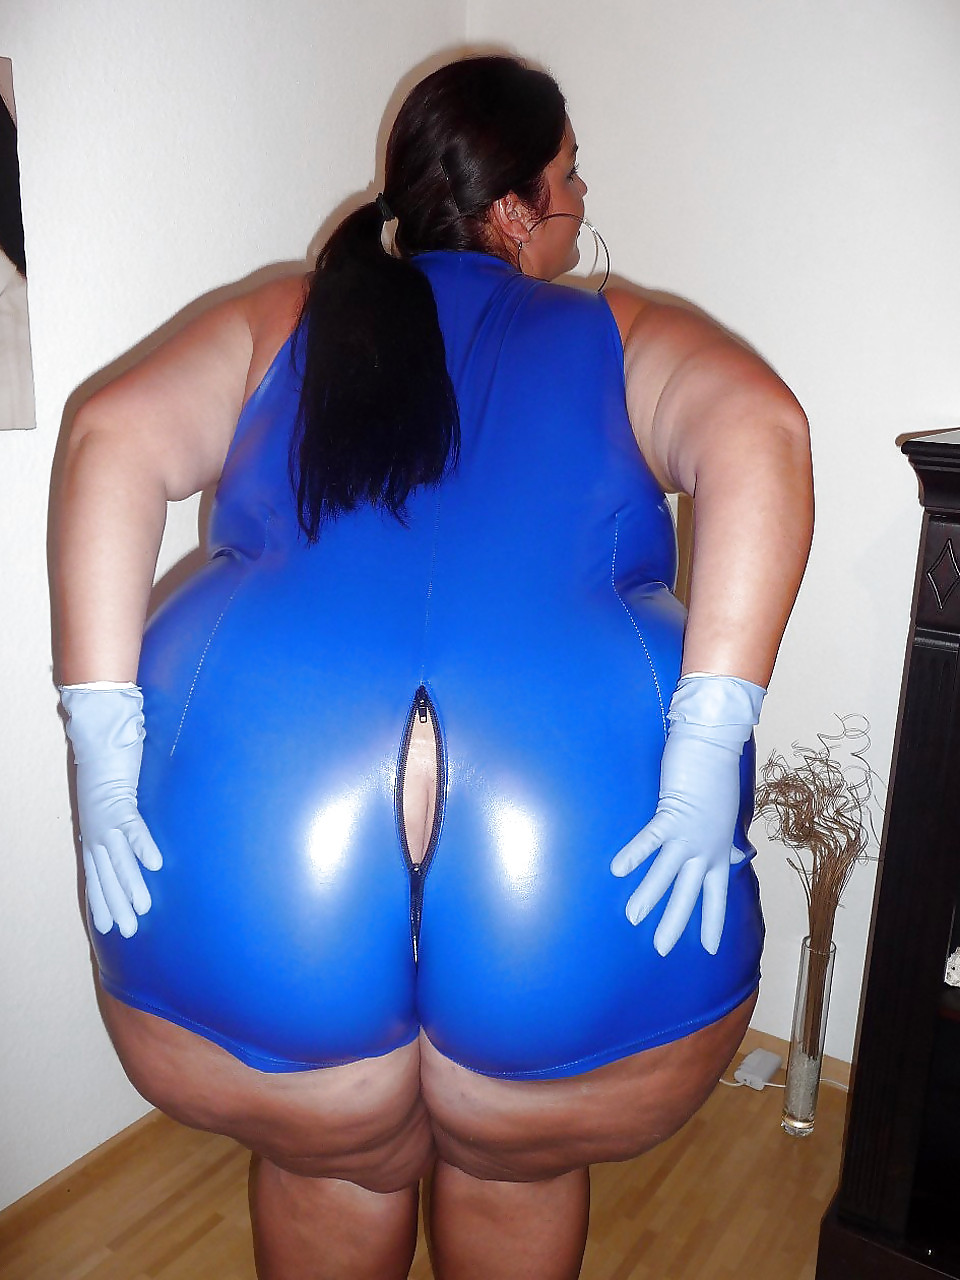 Bbws in latex, leather or just shiny 3 #15973697